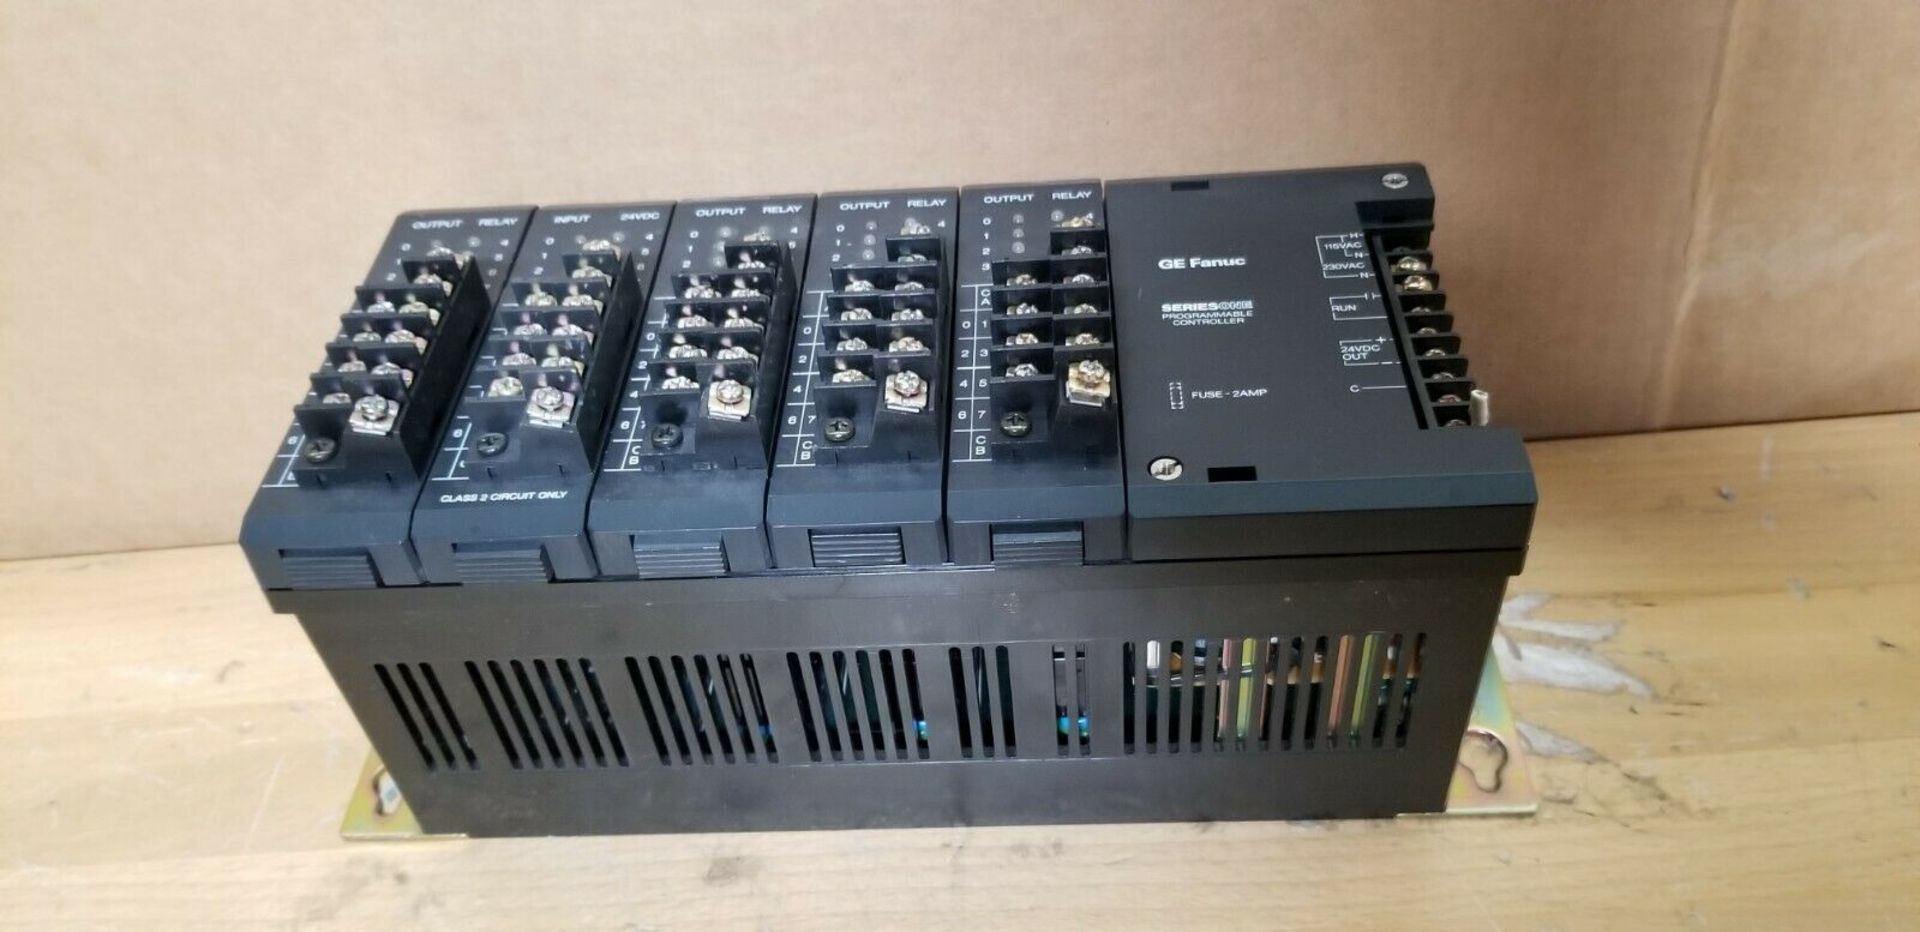 GE SERIES ONE PLC RACK WITH 5 GE FANUC MODULES